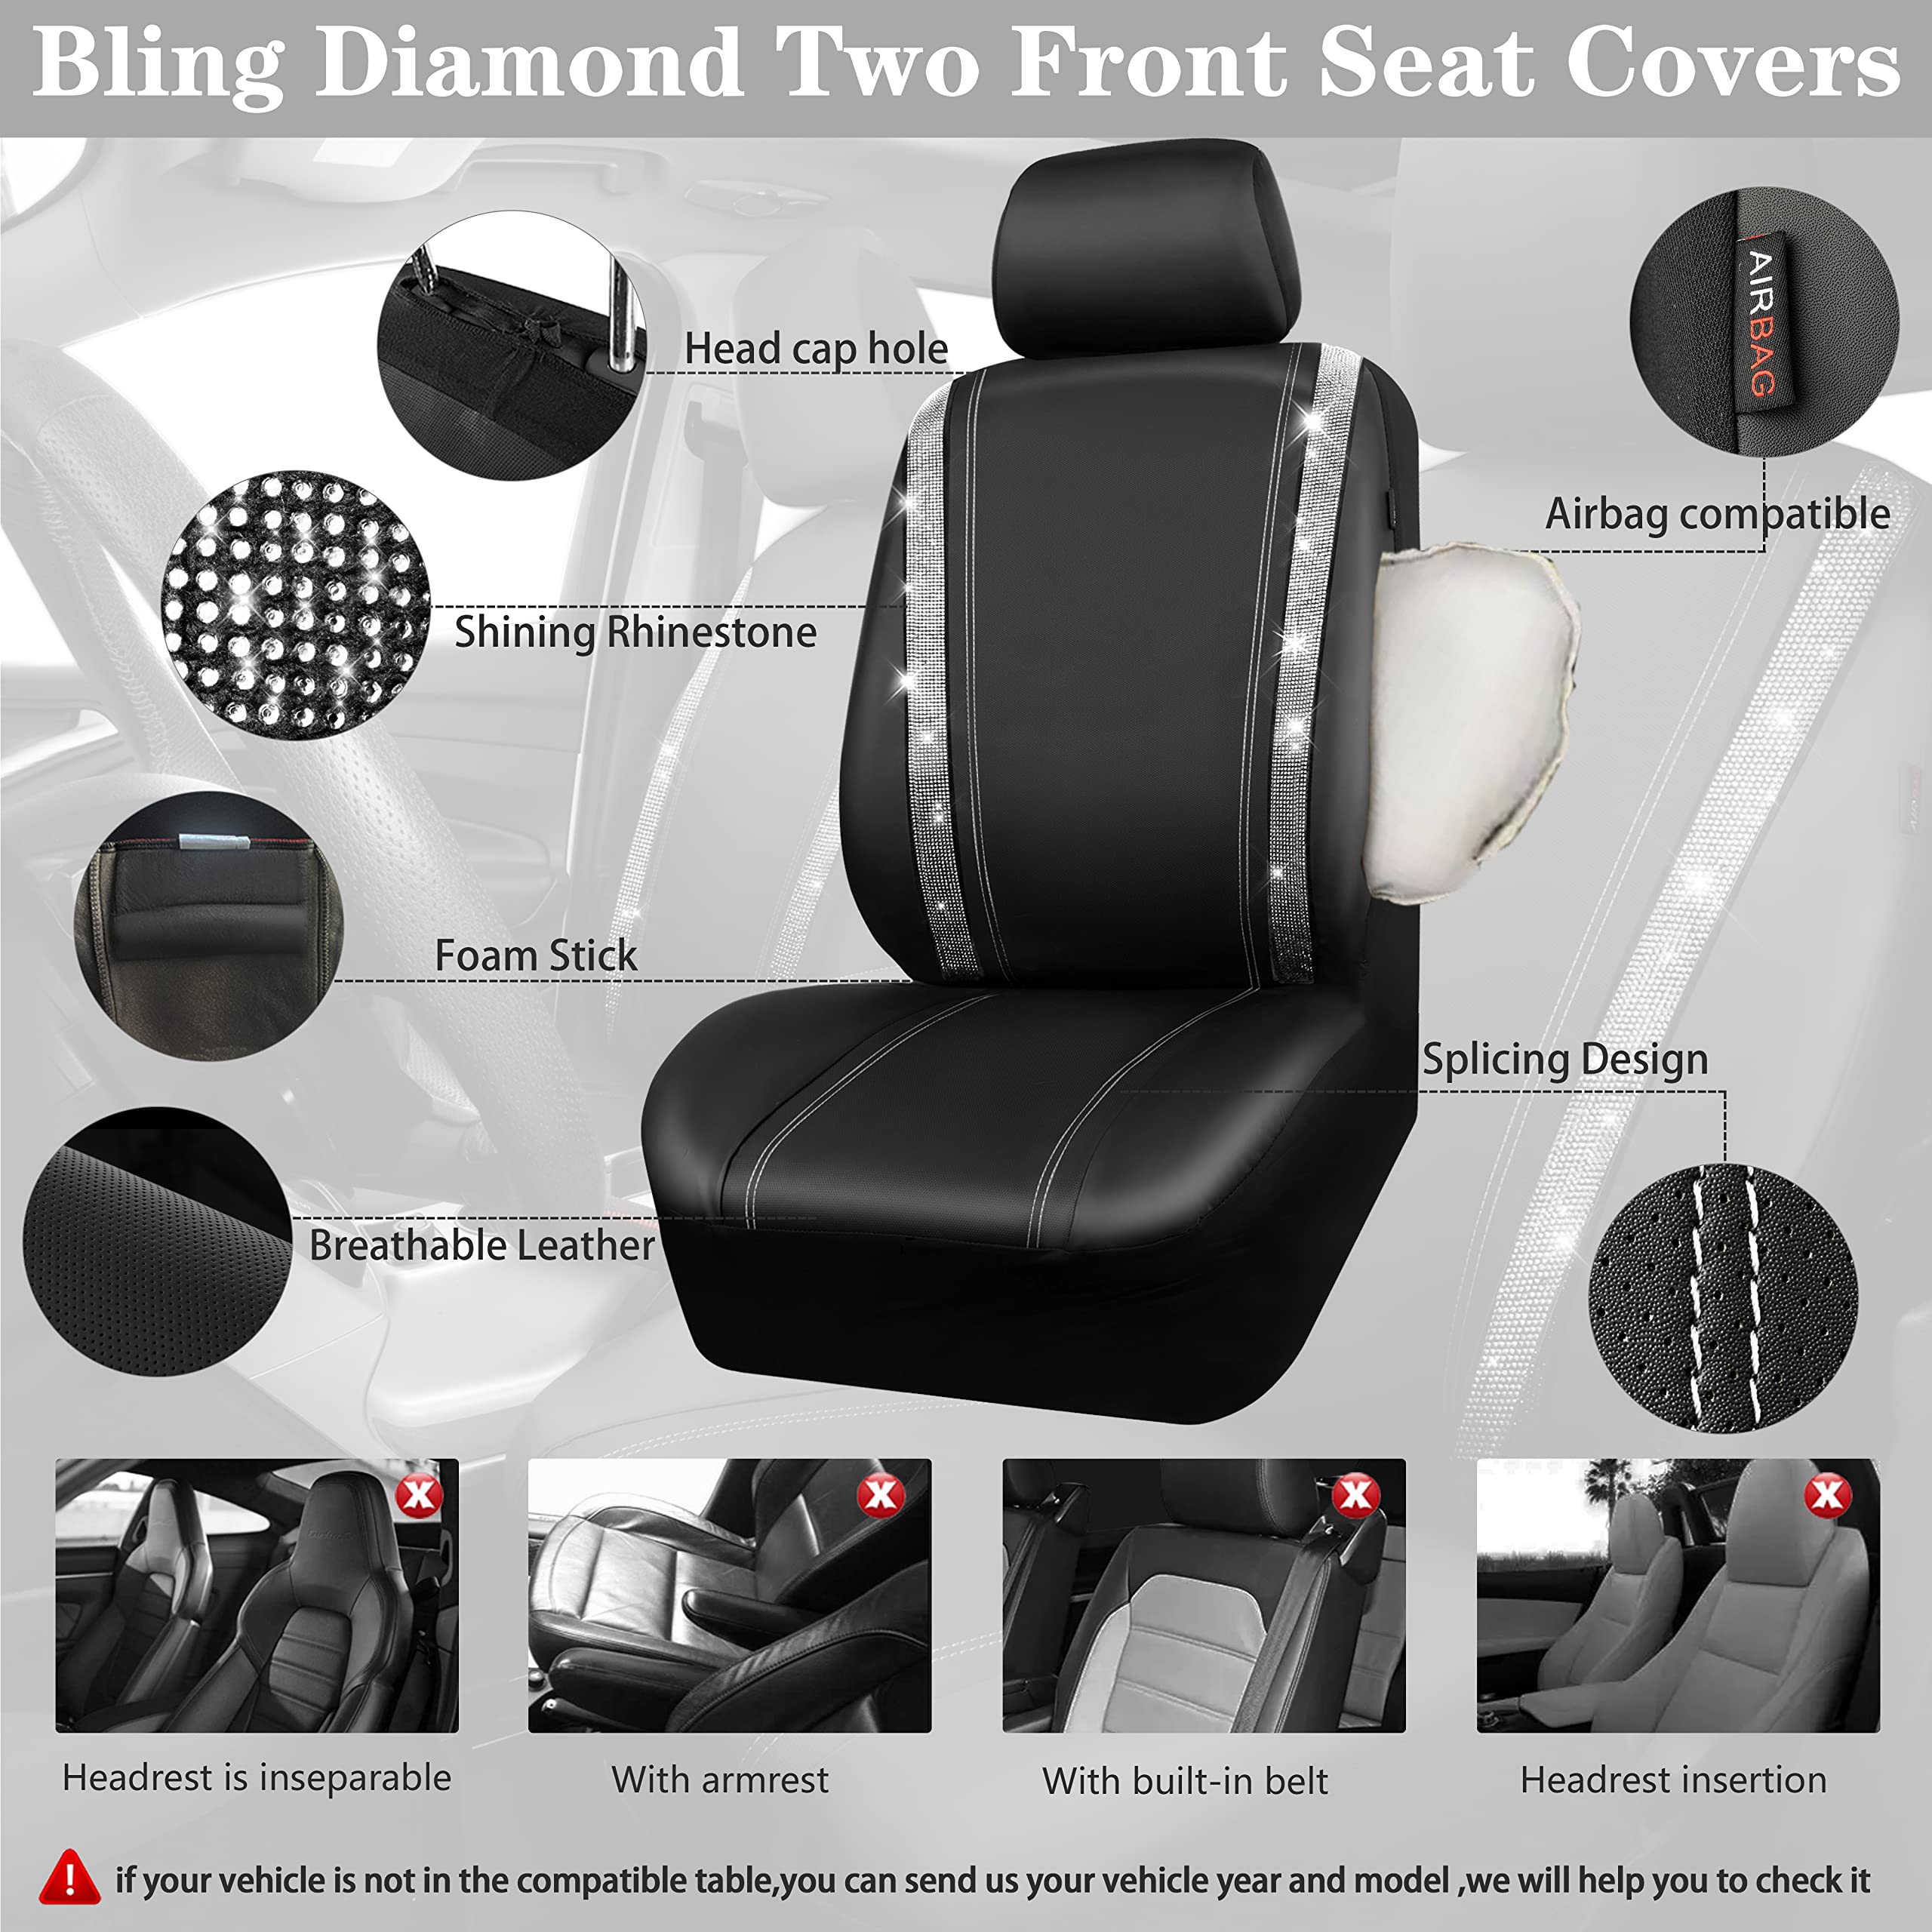 Bling Rhinestone Diamonds Car Seat Covers Leather&Shining Diamond Car Floor mats Carpet with Anti-Slip Nibs&Bling Car Accessories Sets-Silver